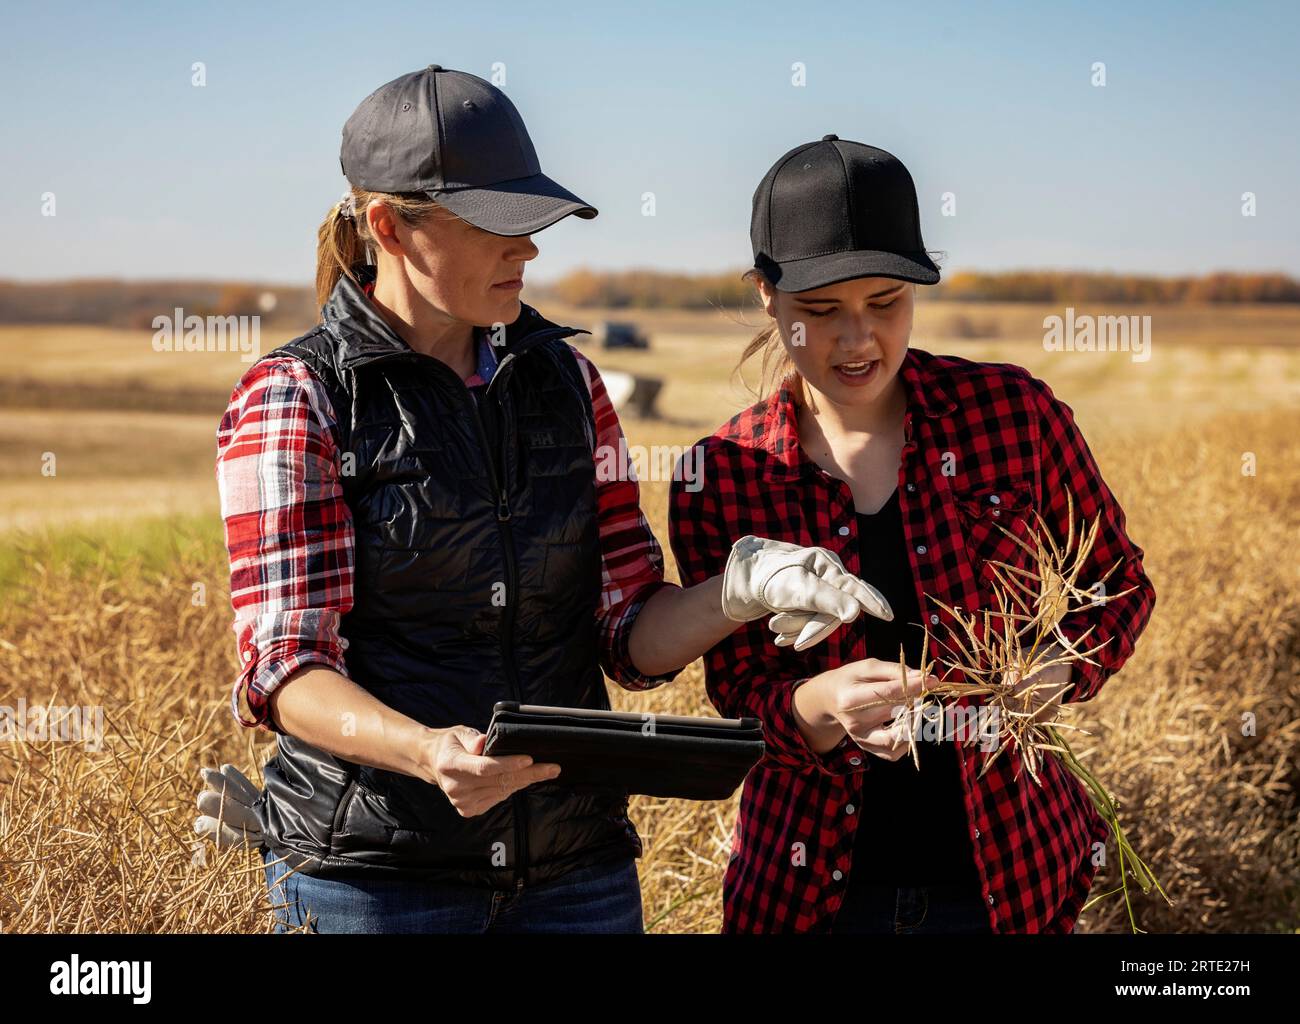 A woman farmer standing in the fields teaching her apprentice about modern farming techniques for canola crops using wireless technologies and agri... Stock Photo